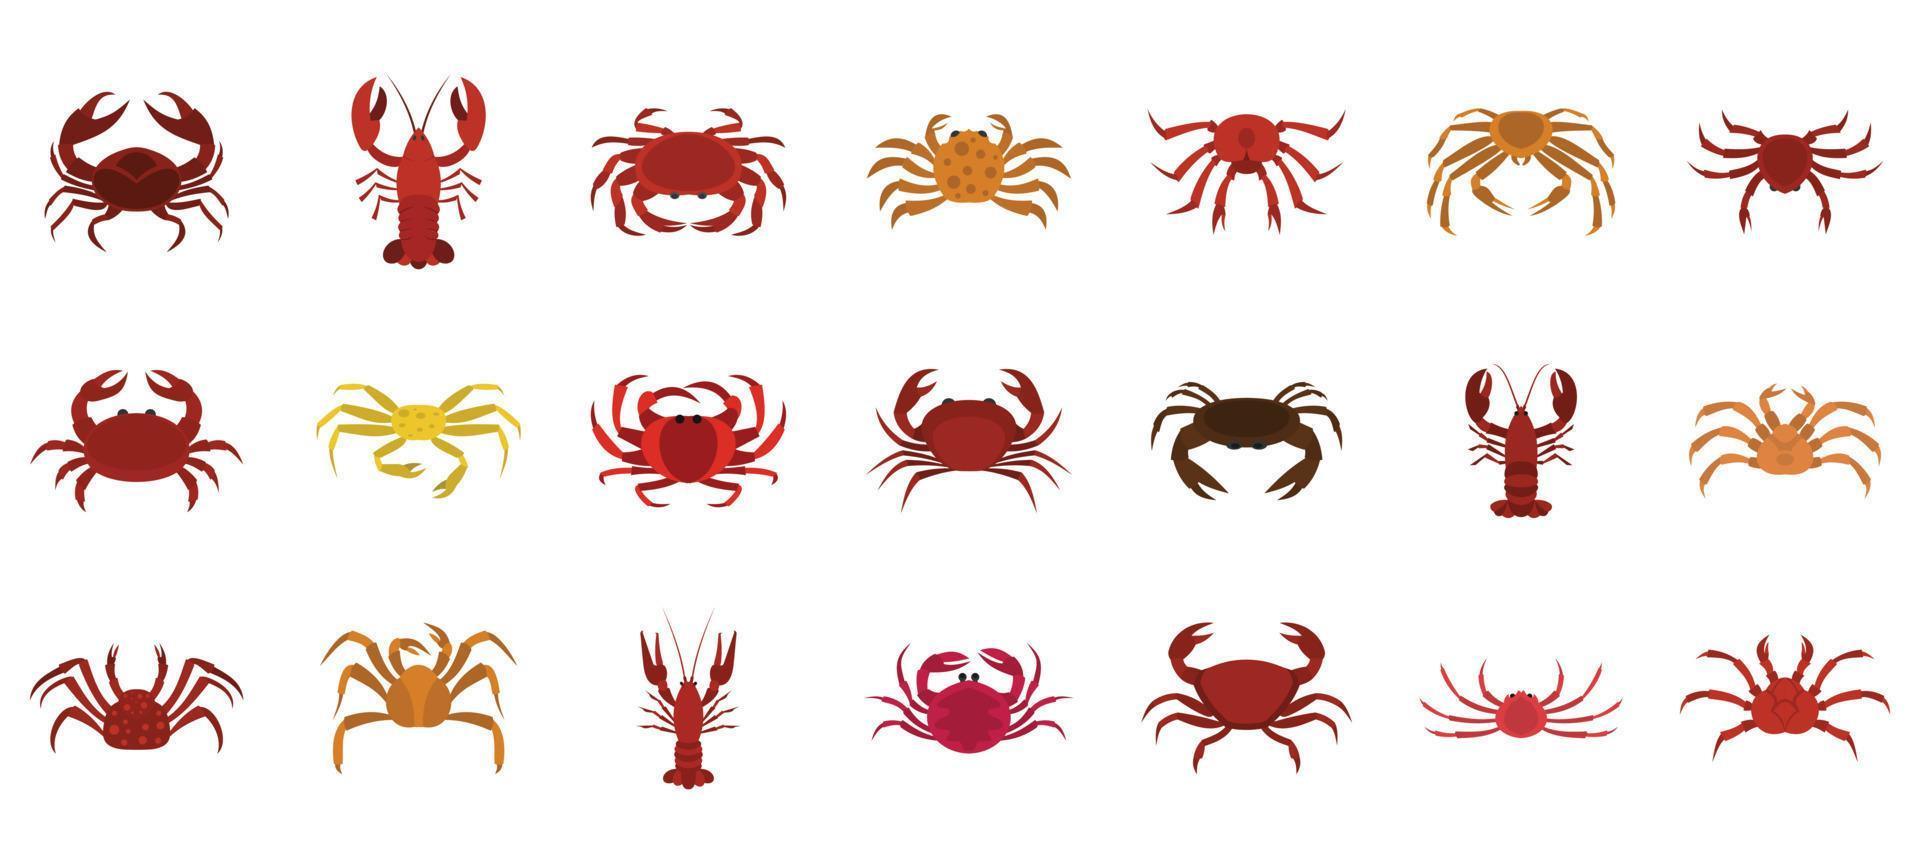 Cancer icon set, flat style vector